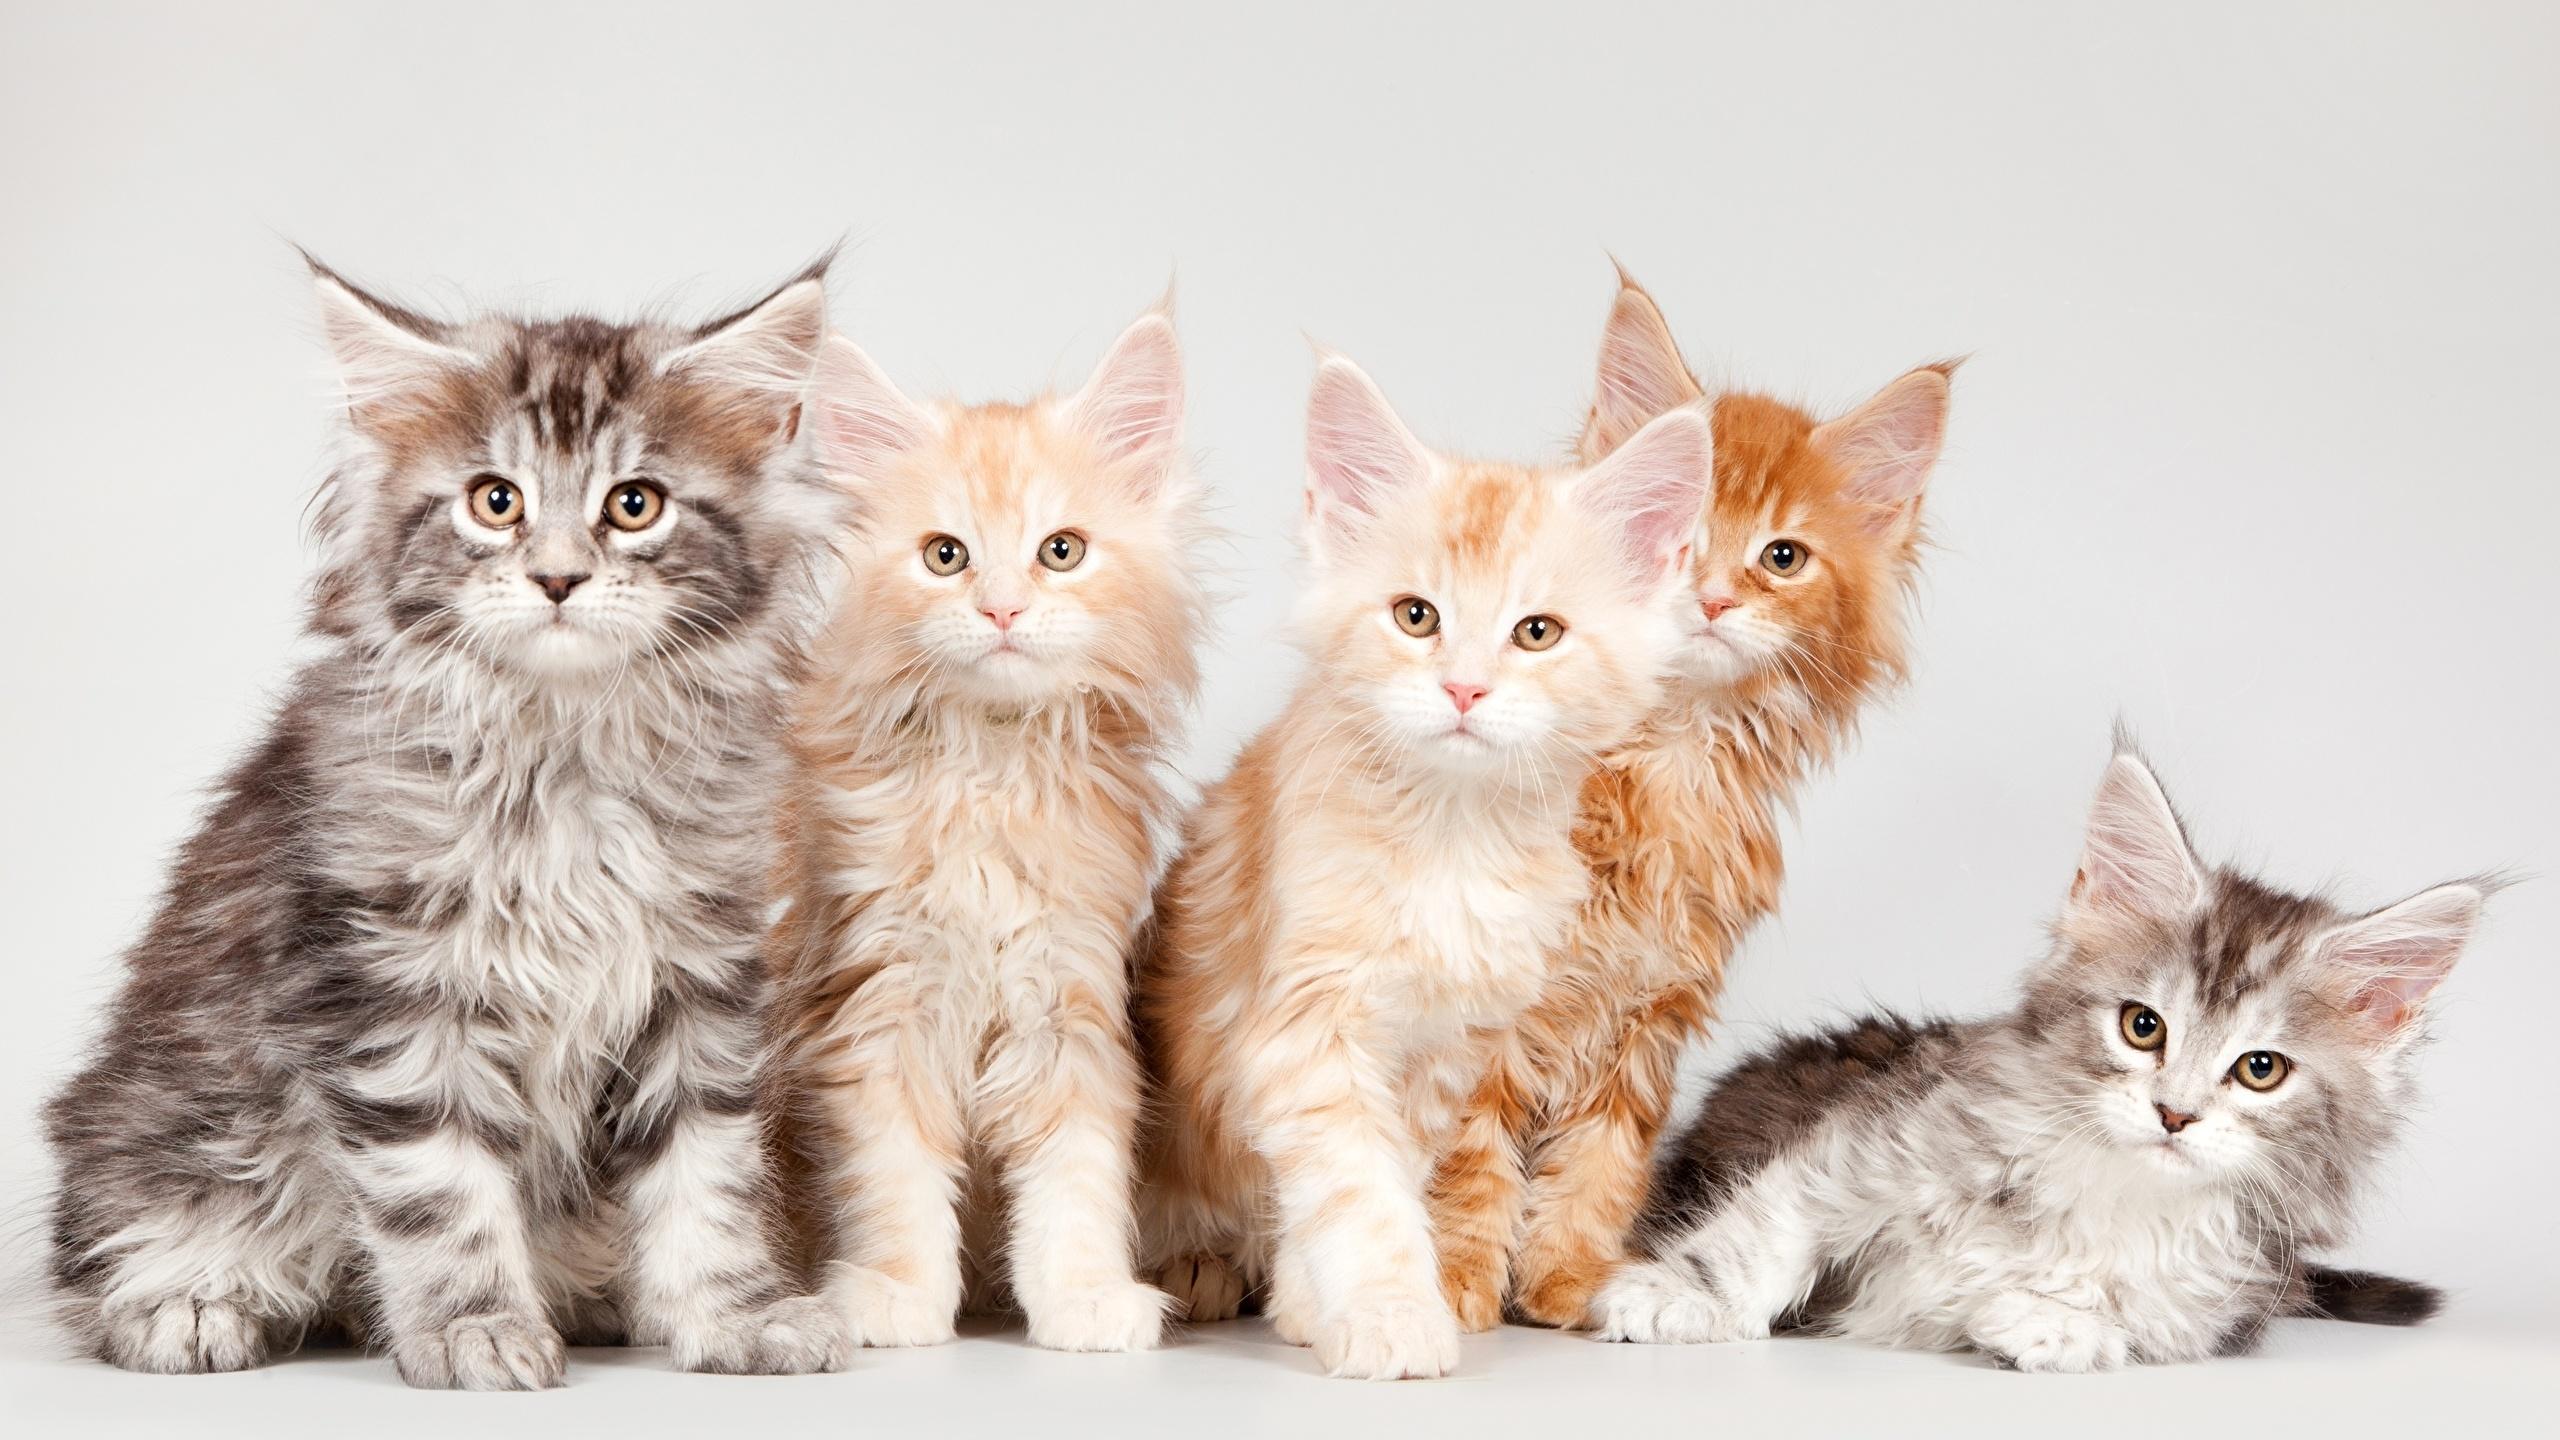 image Kittens Maine Coon Cats Fluffy Ginger color Animals 2560x1440